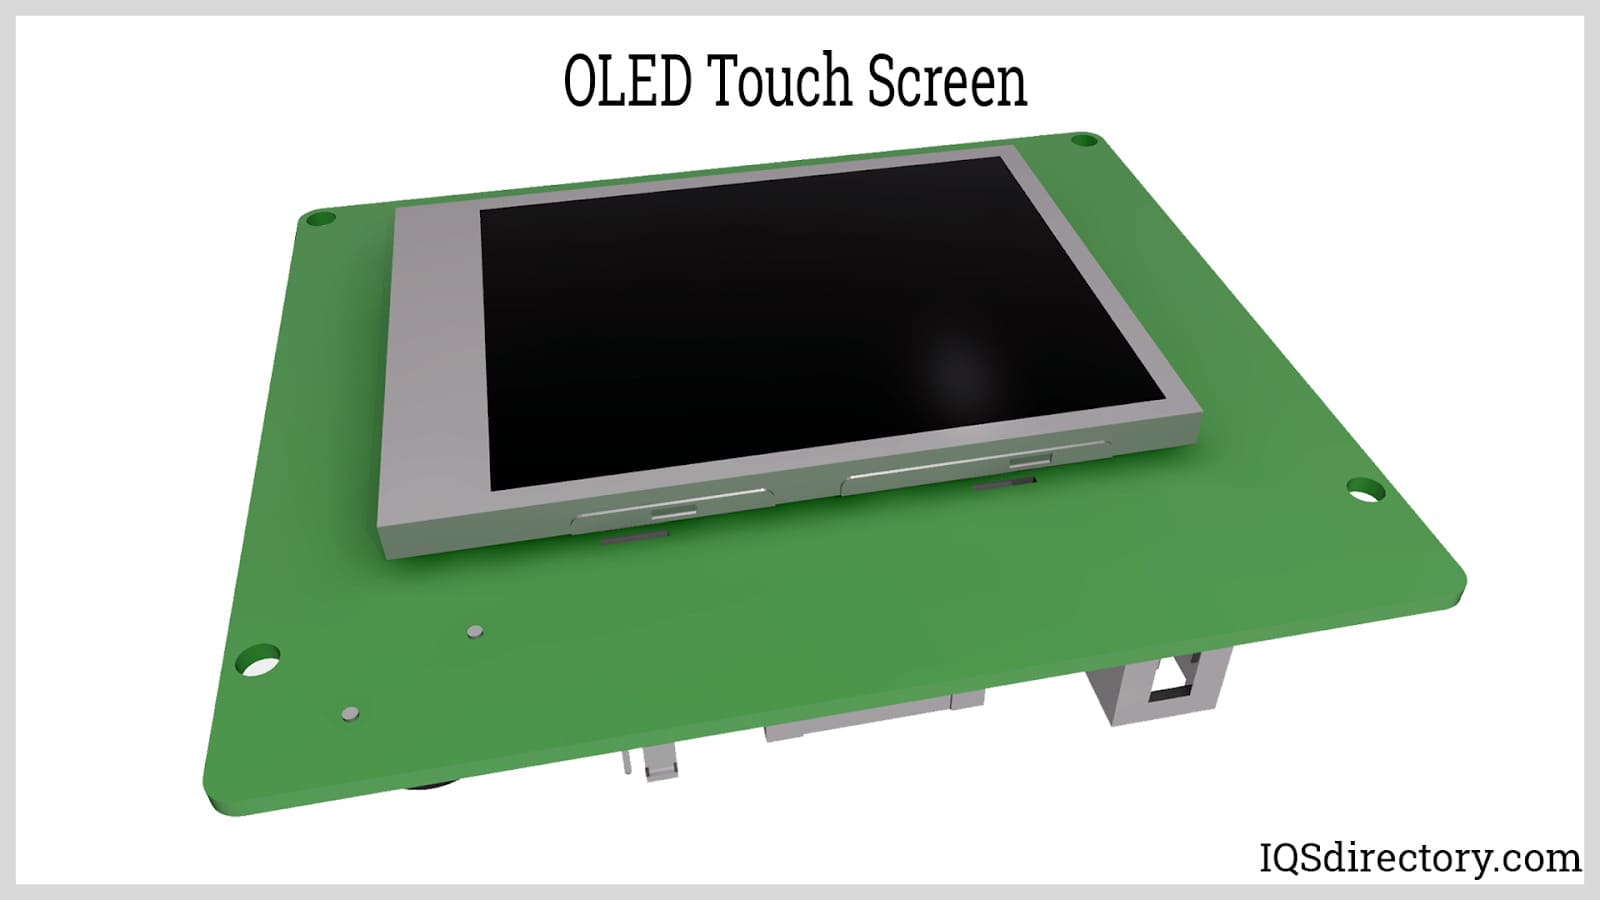 OLED Touch Screen